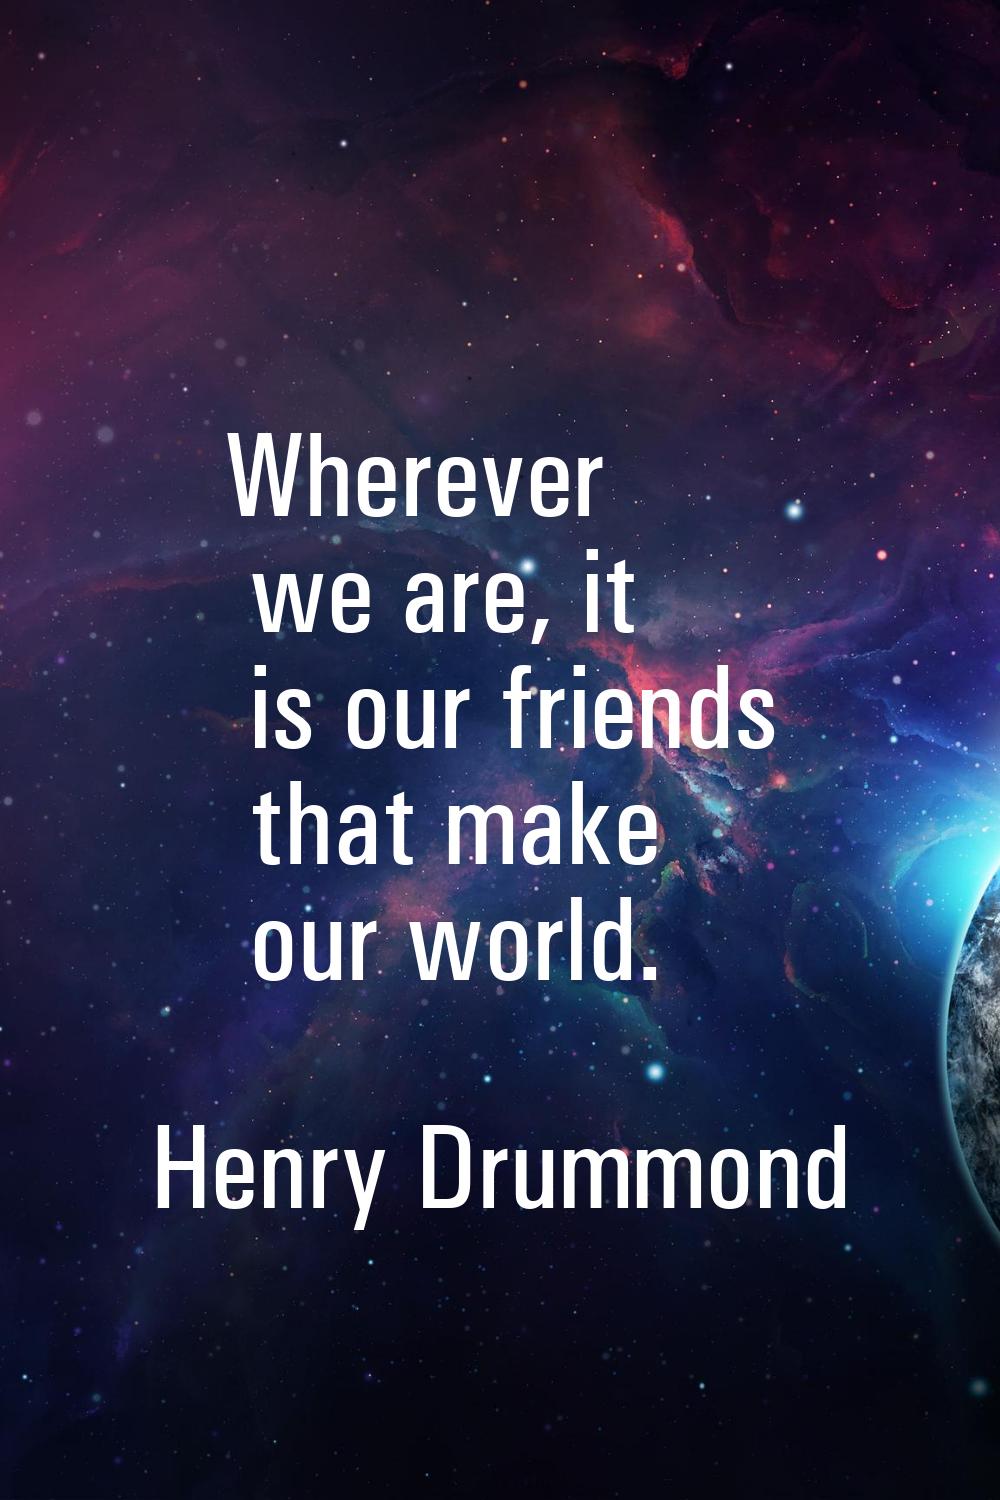 Wherever we are, it is our friends that make our world.